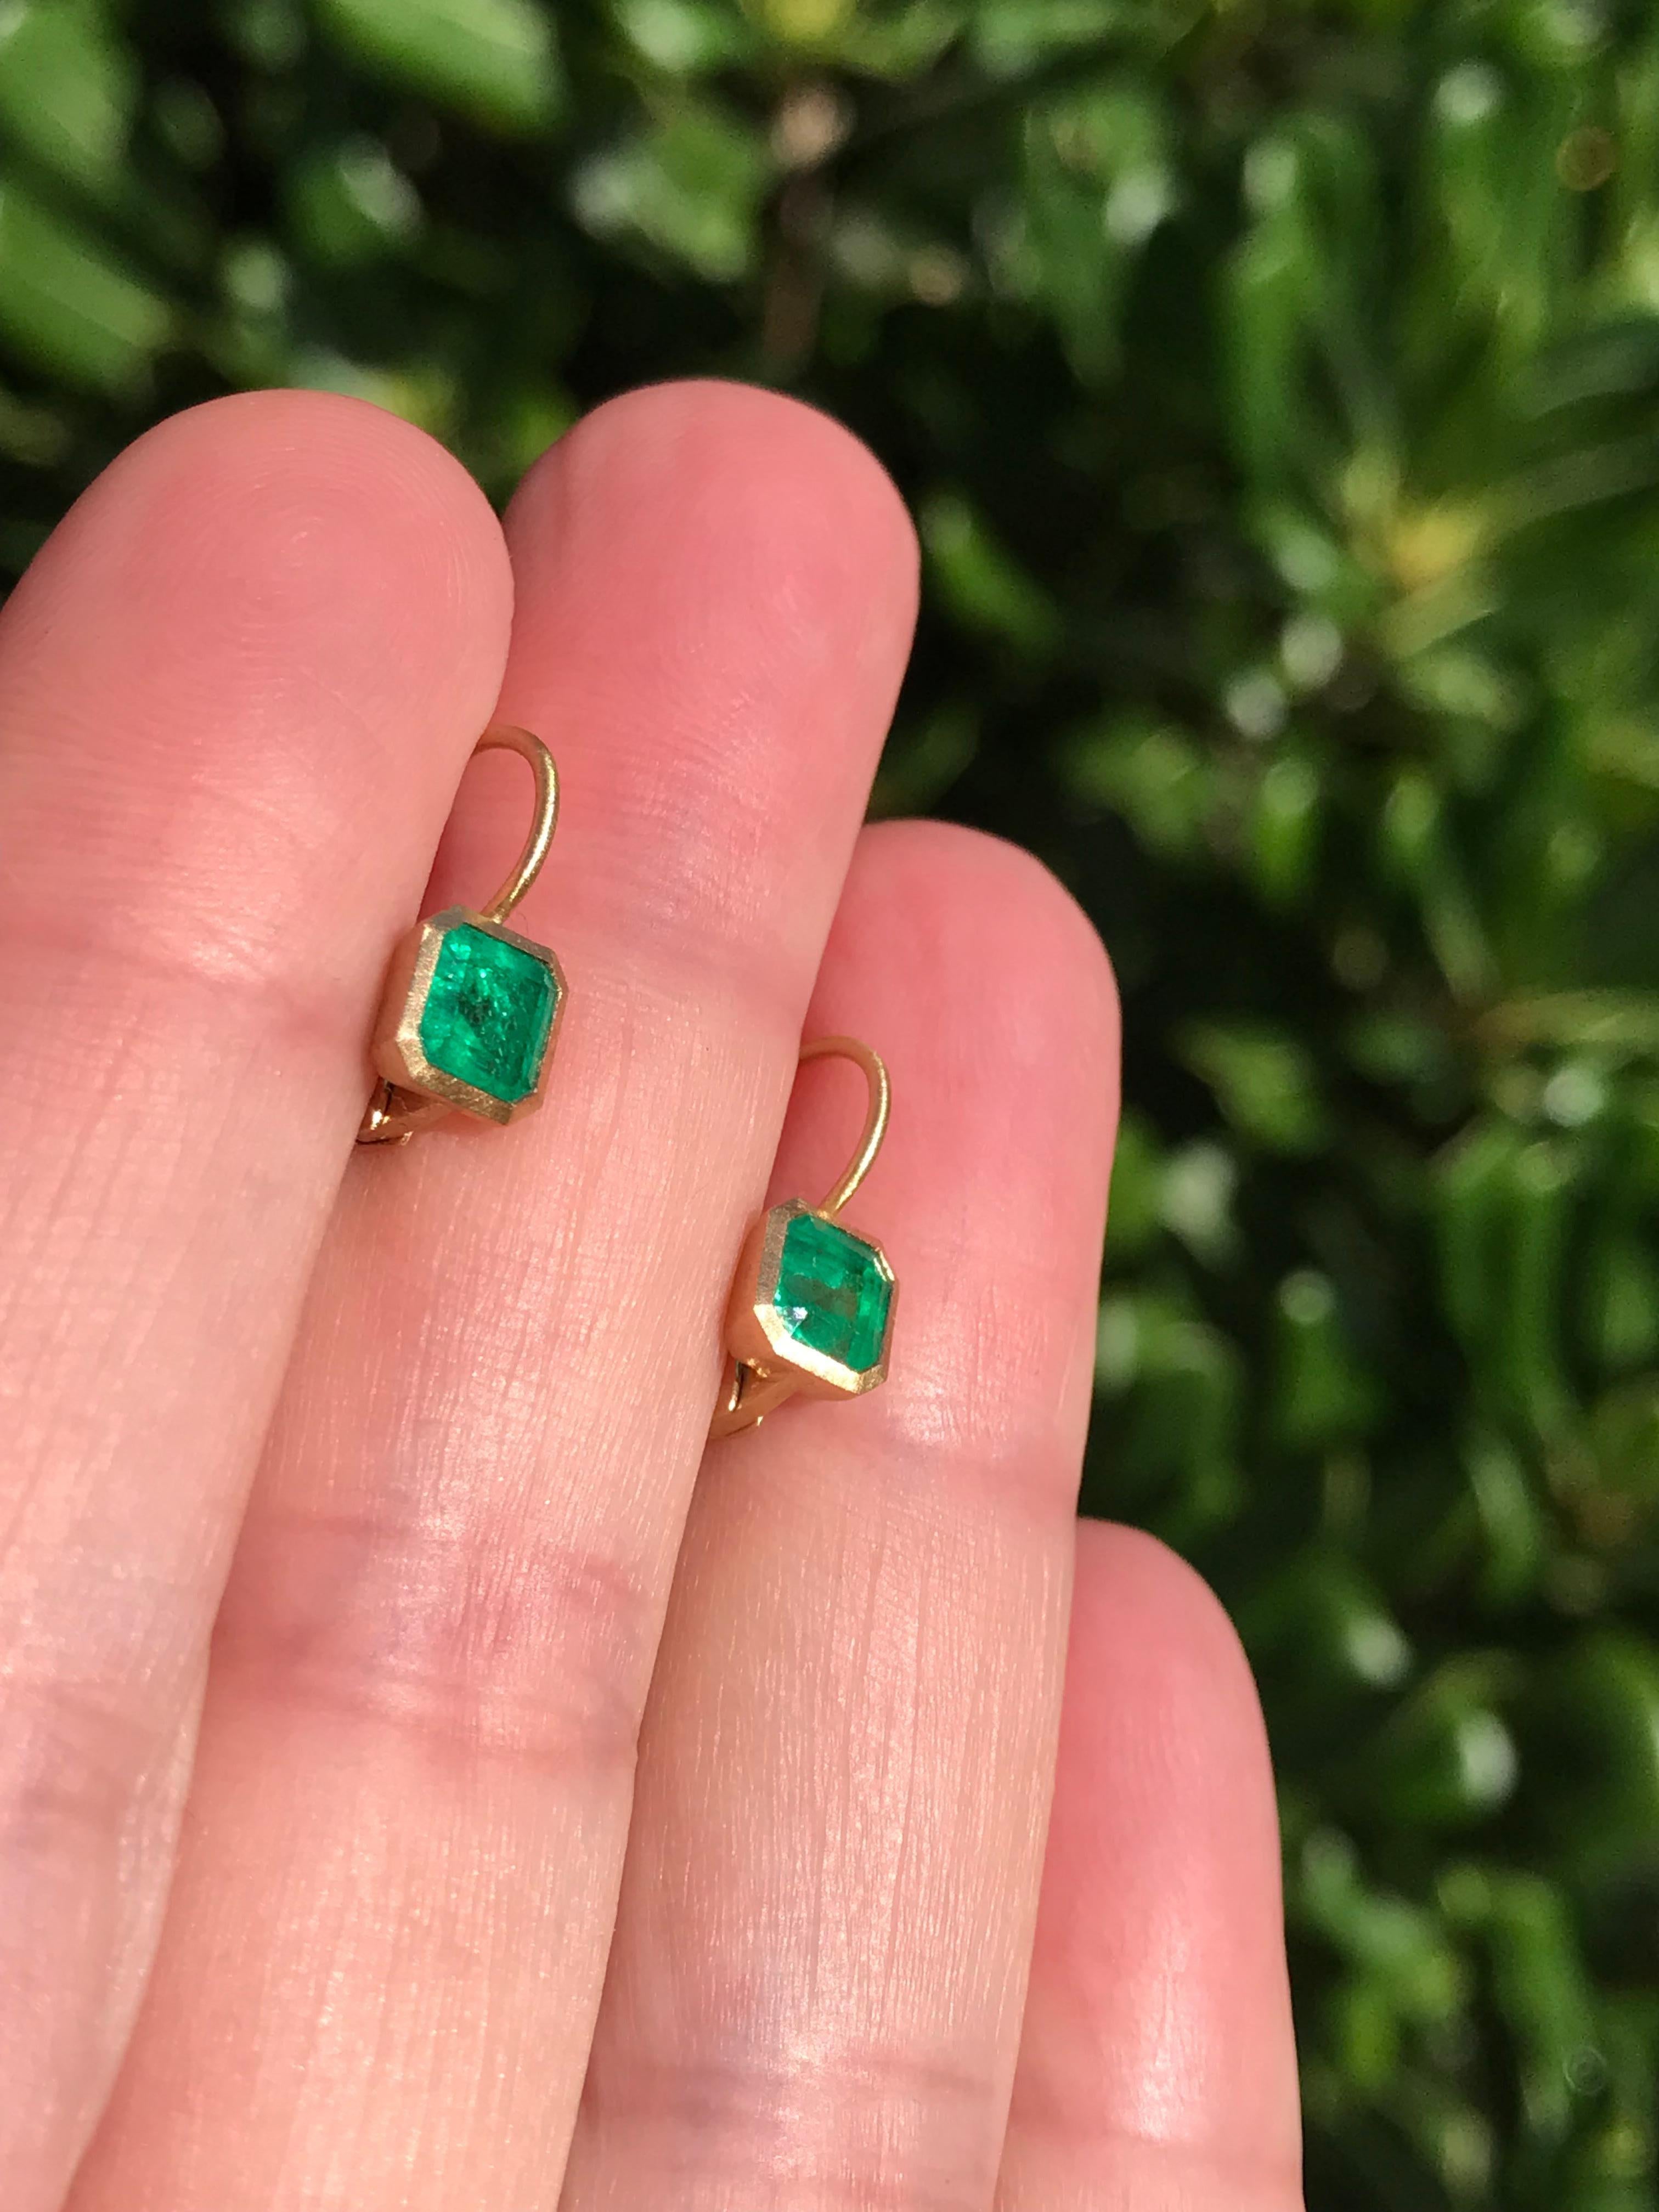 Dalben 0.91 Carat Colombian Emerald Yellow Gold Tiny Earrings For Sale 1